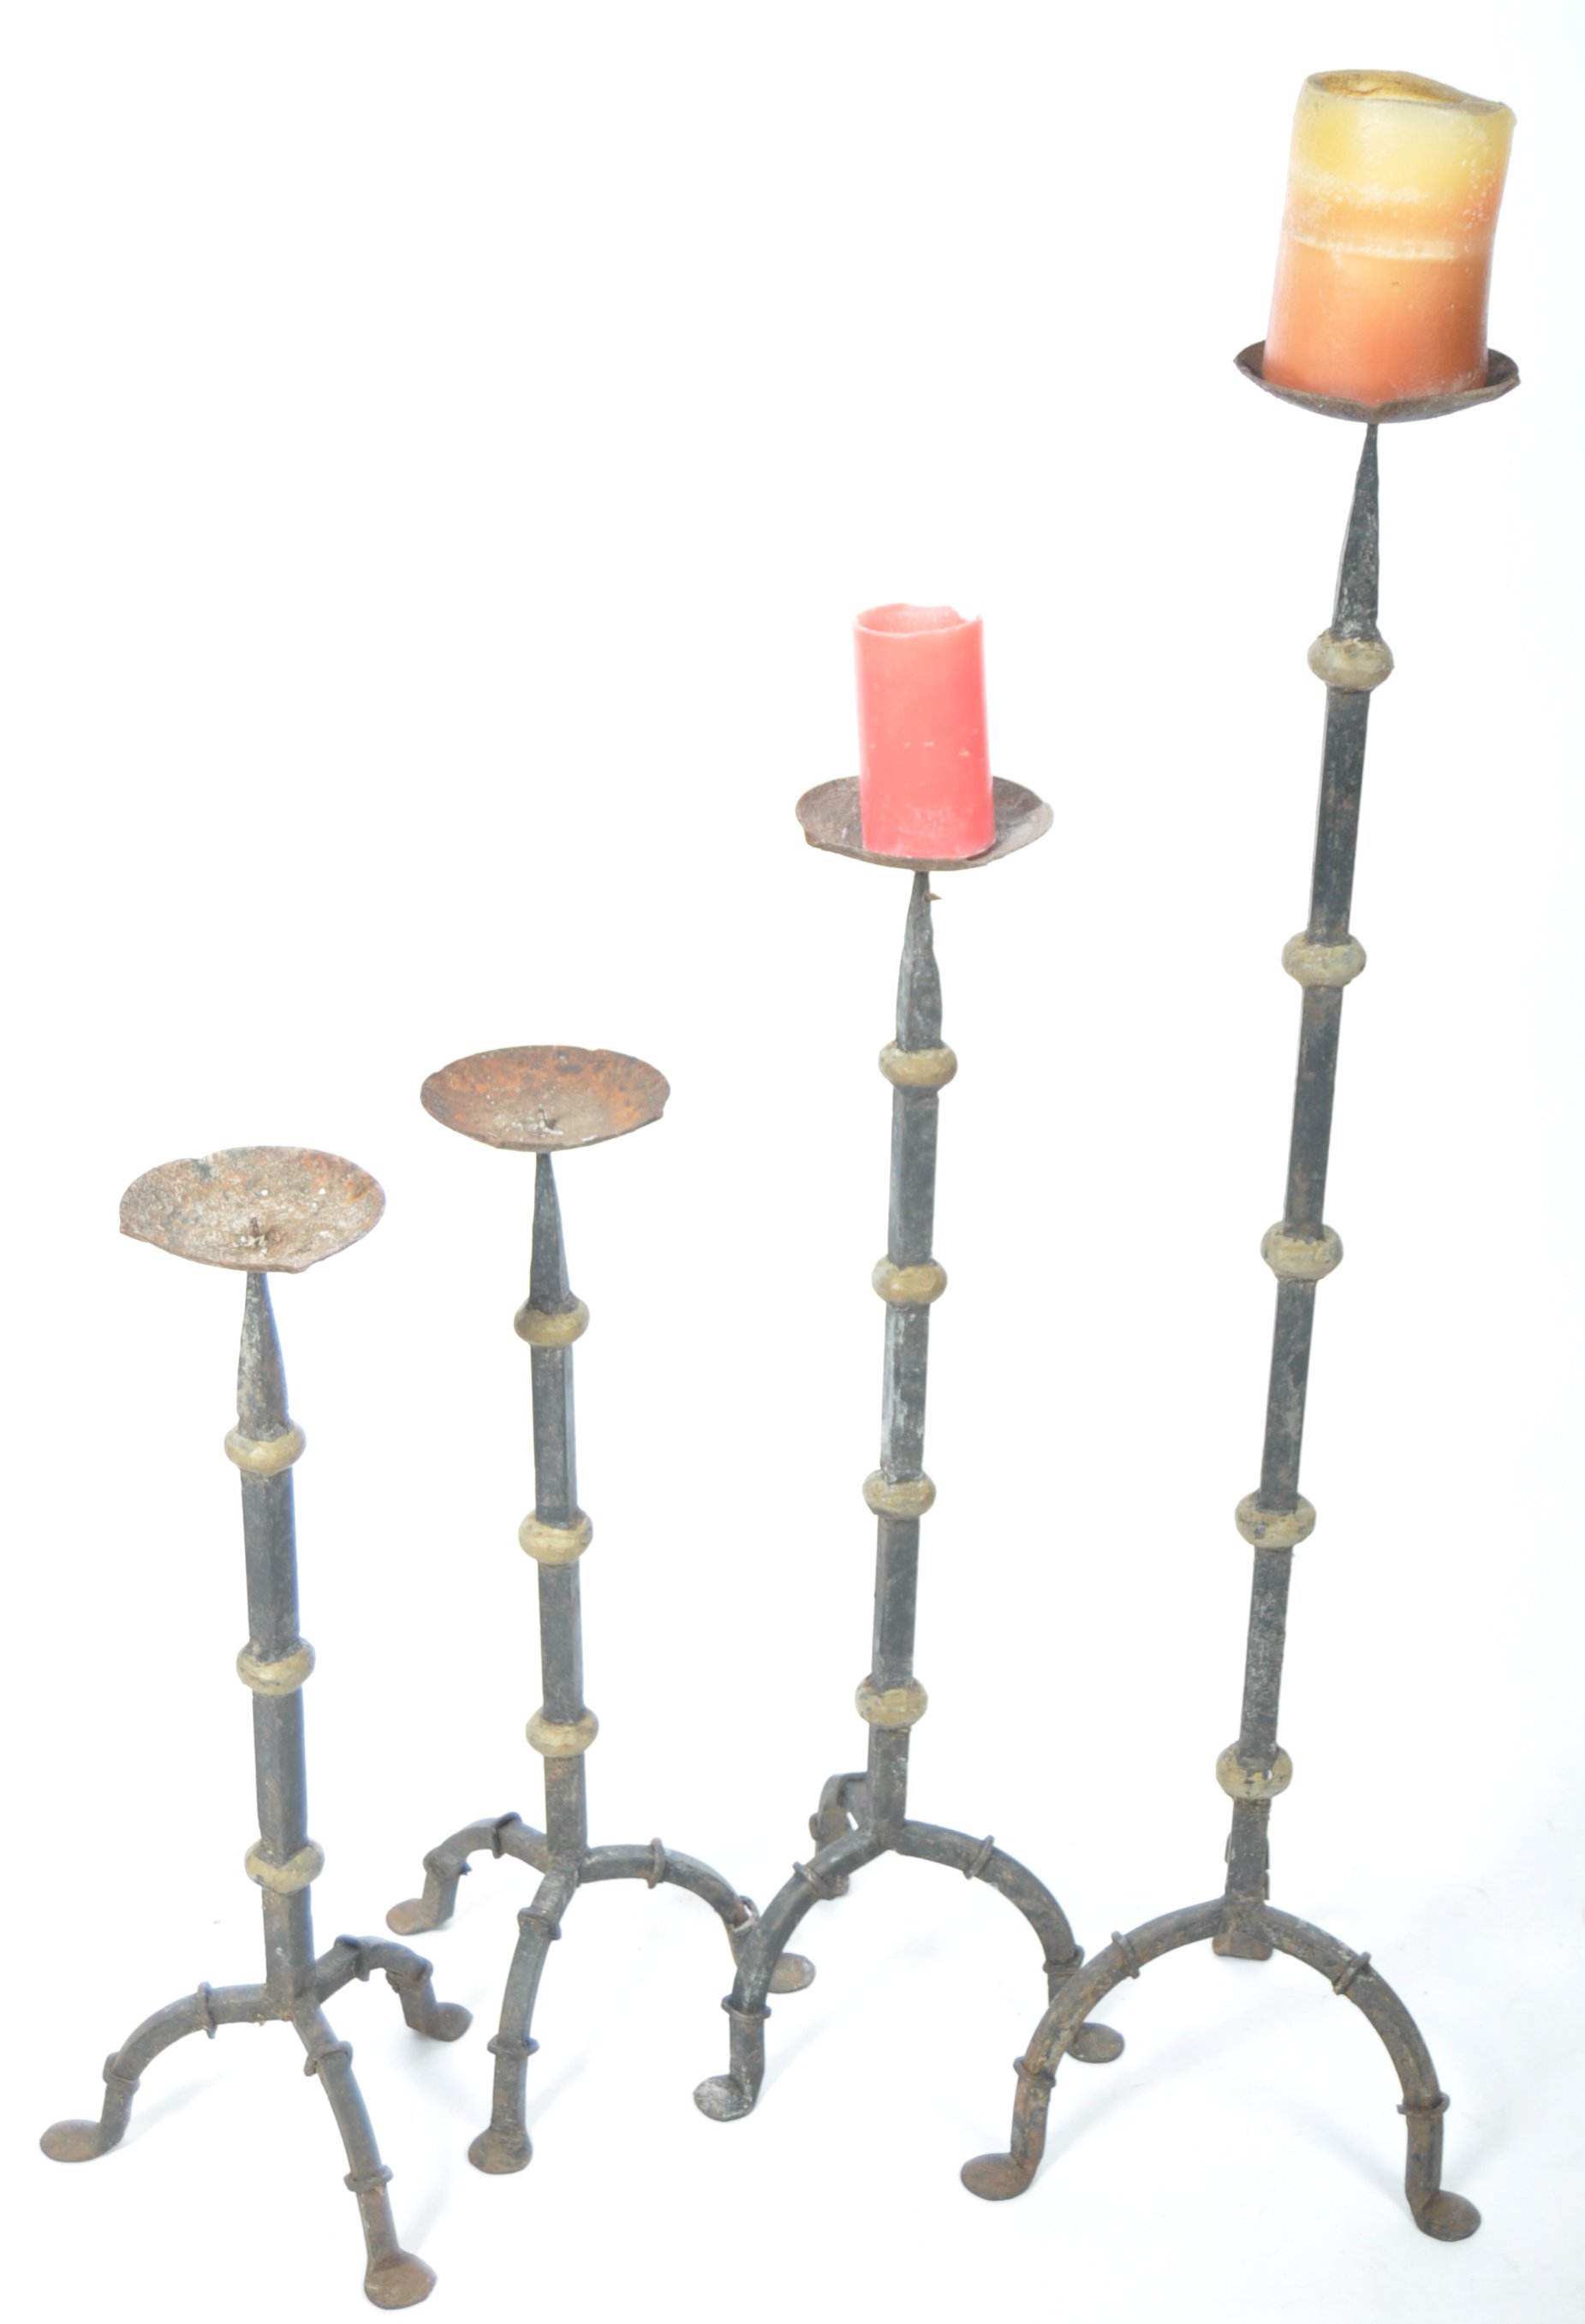 GOOD GROUP OF FOUR VICTORIAN GRADUATING IRON WORK CANDLE HOLDERS - Image 2 of 6